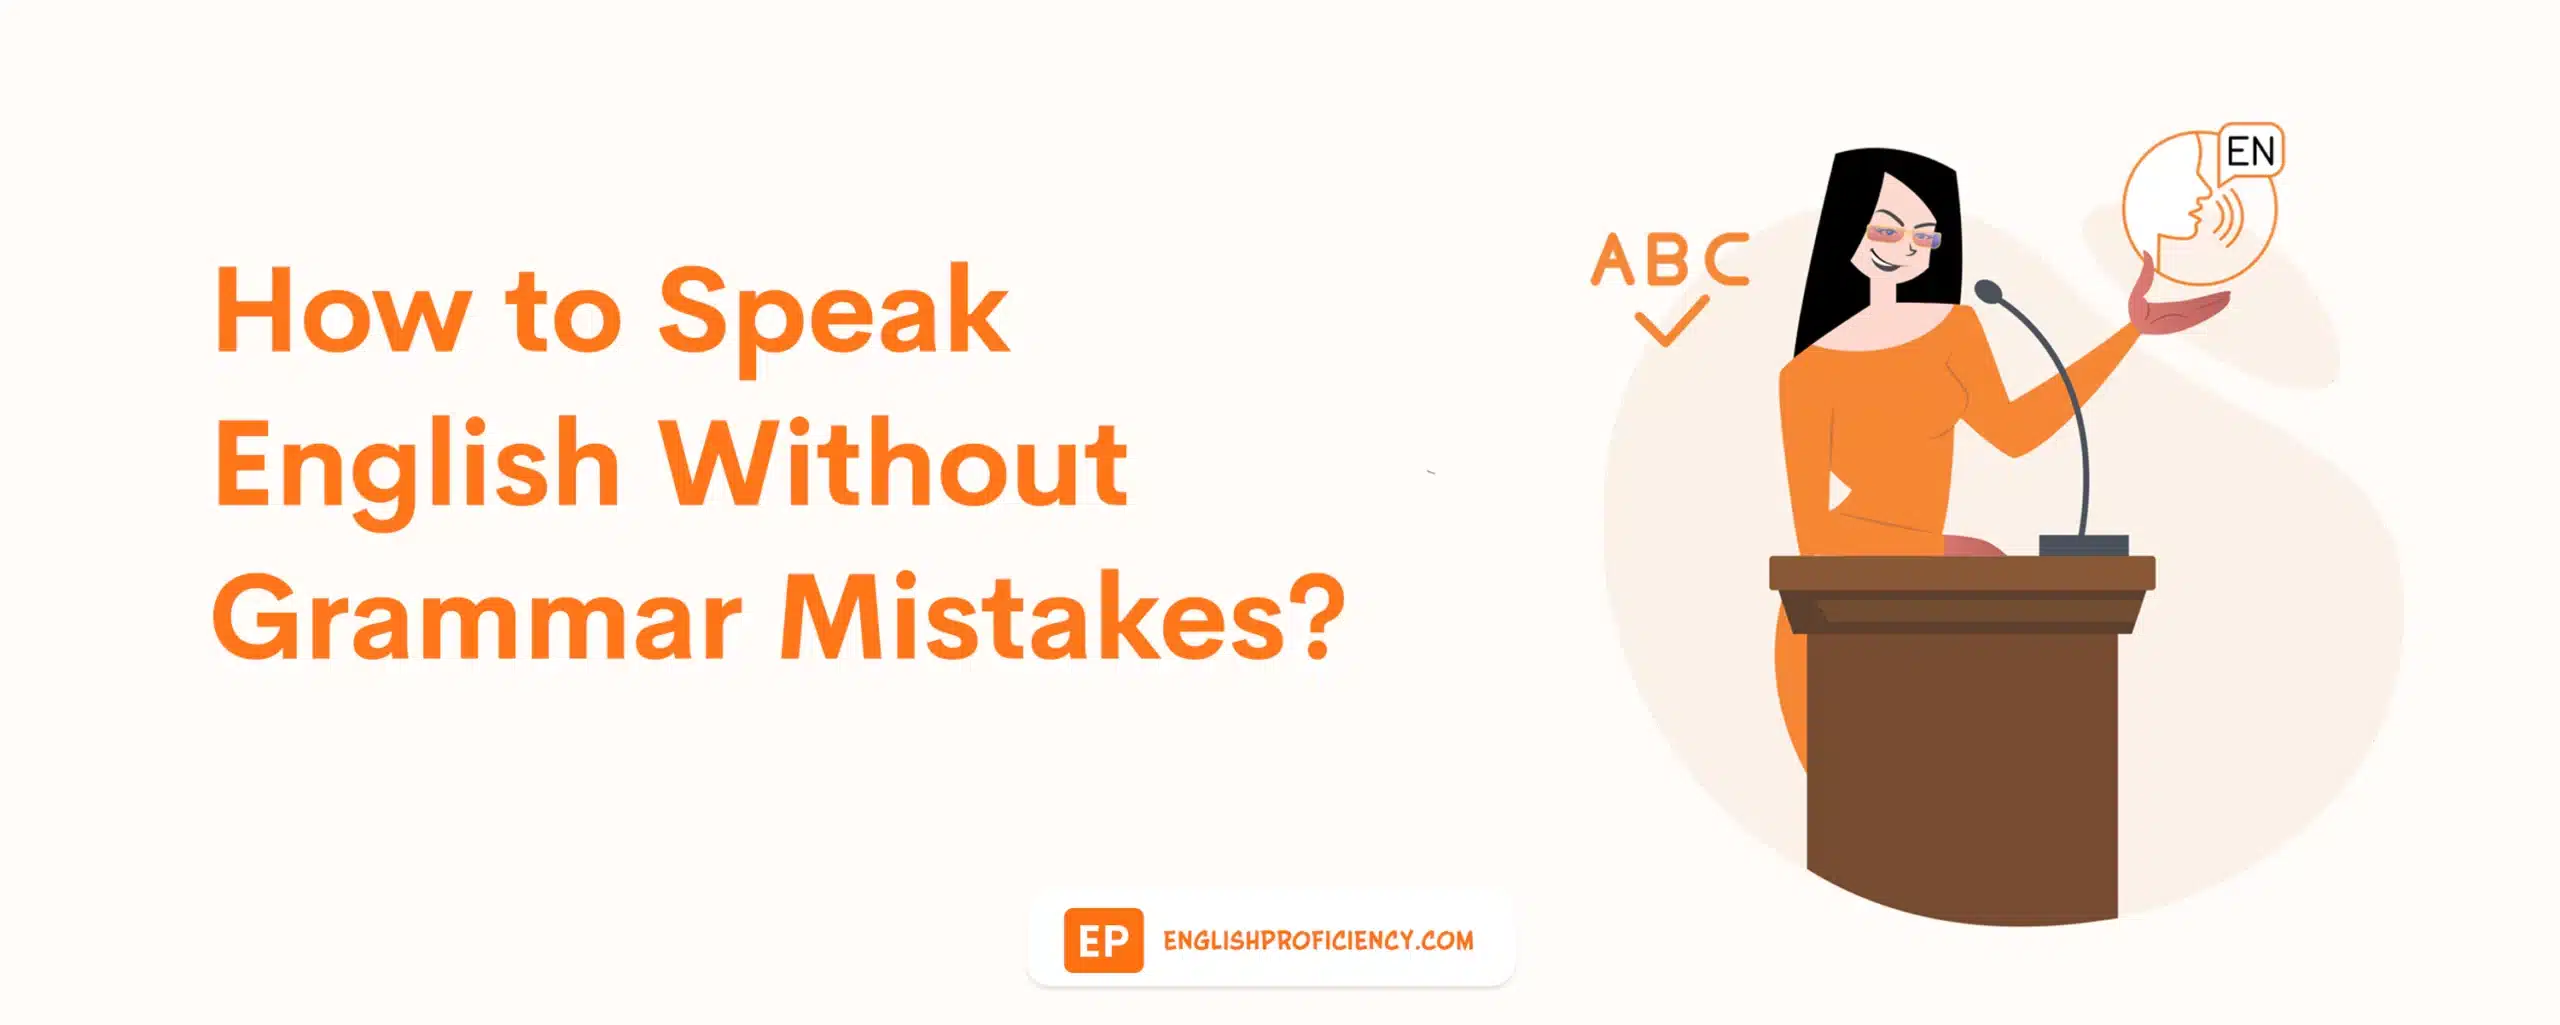 How to Speak English Without Grammar Mistakes